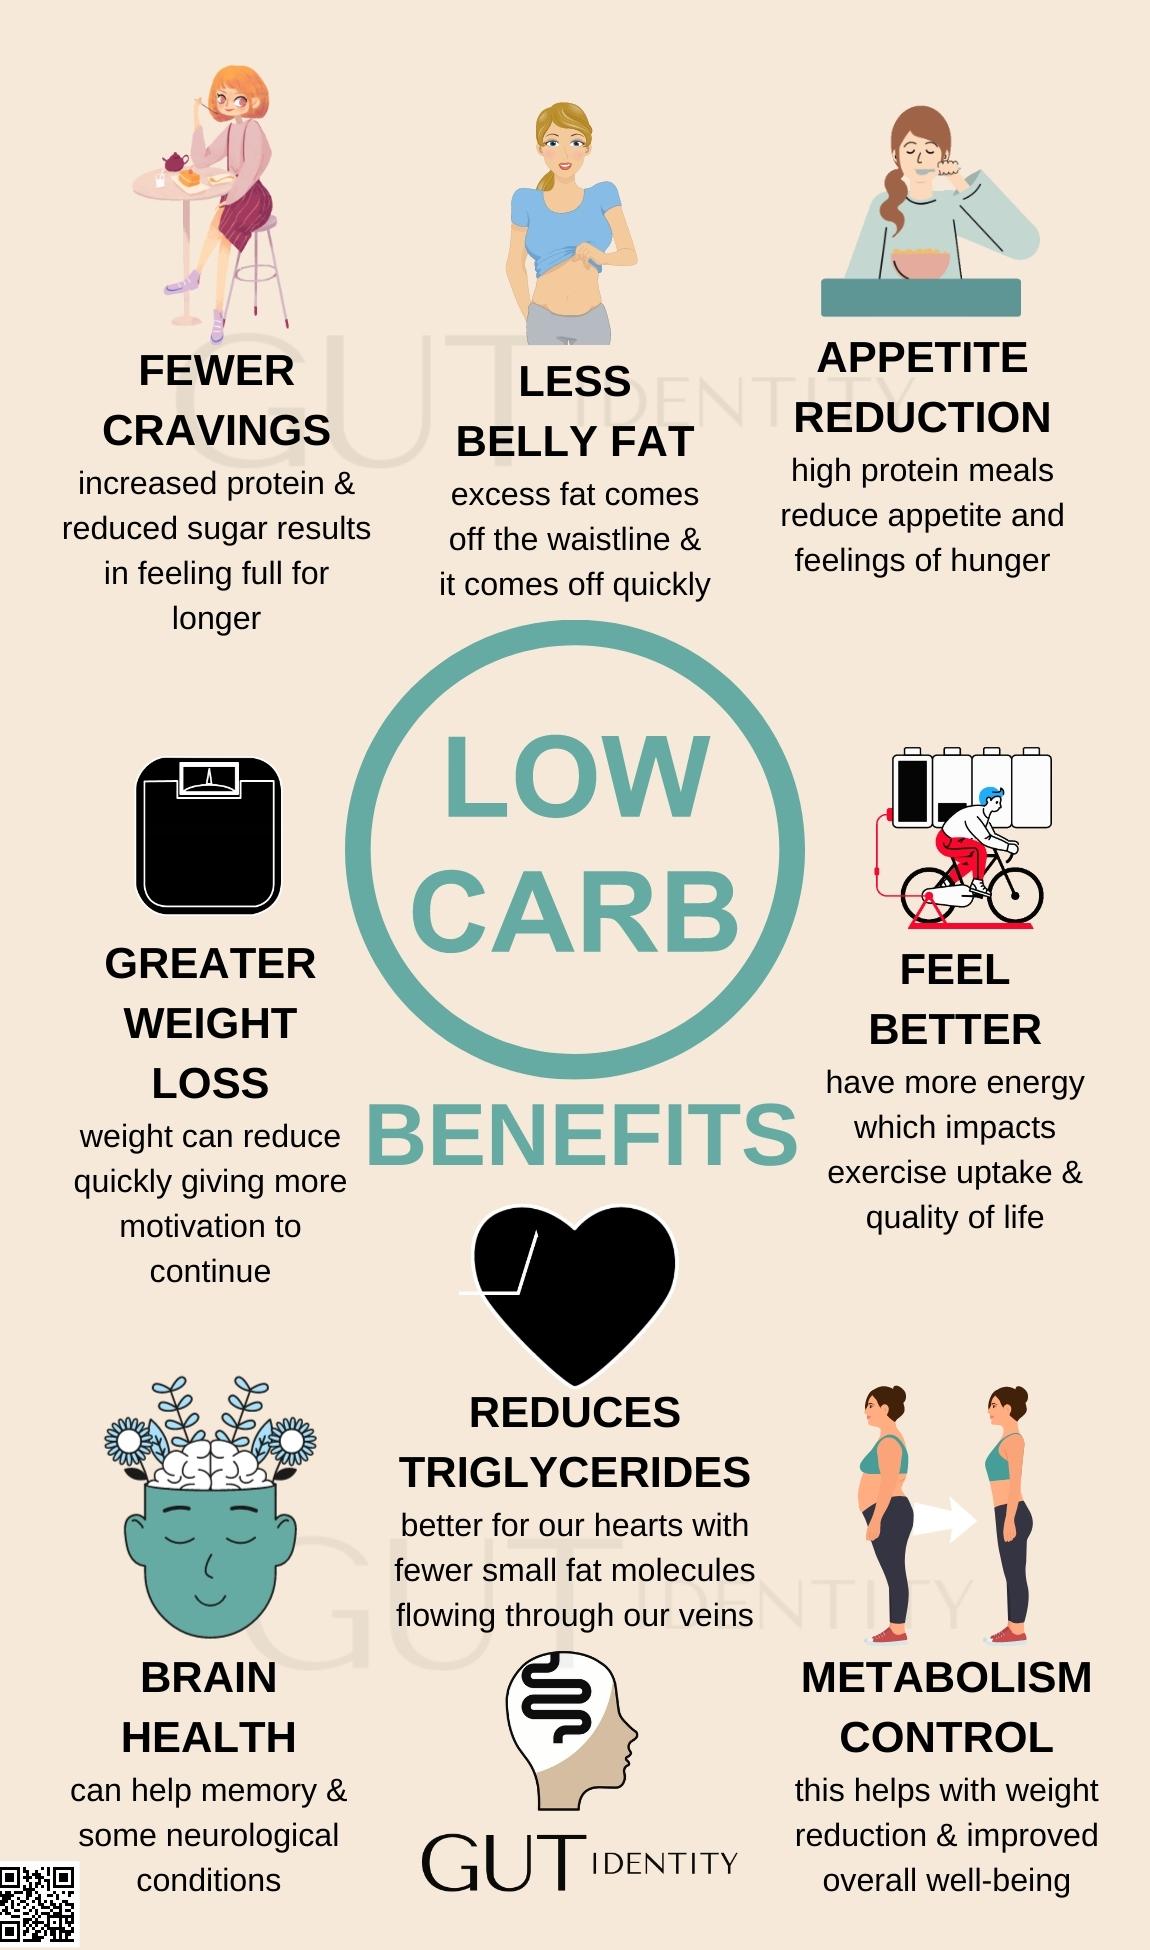 Benefits of low-carb diets